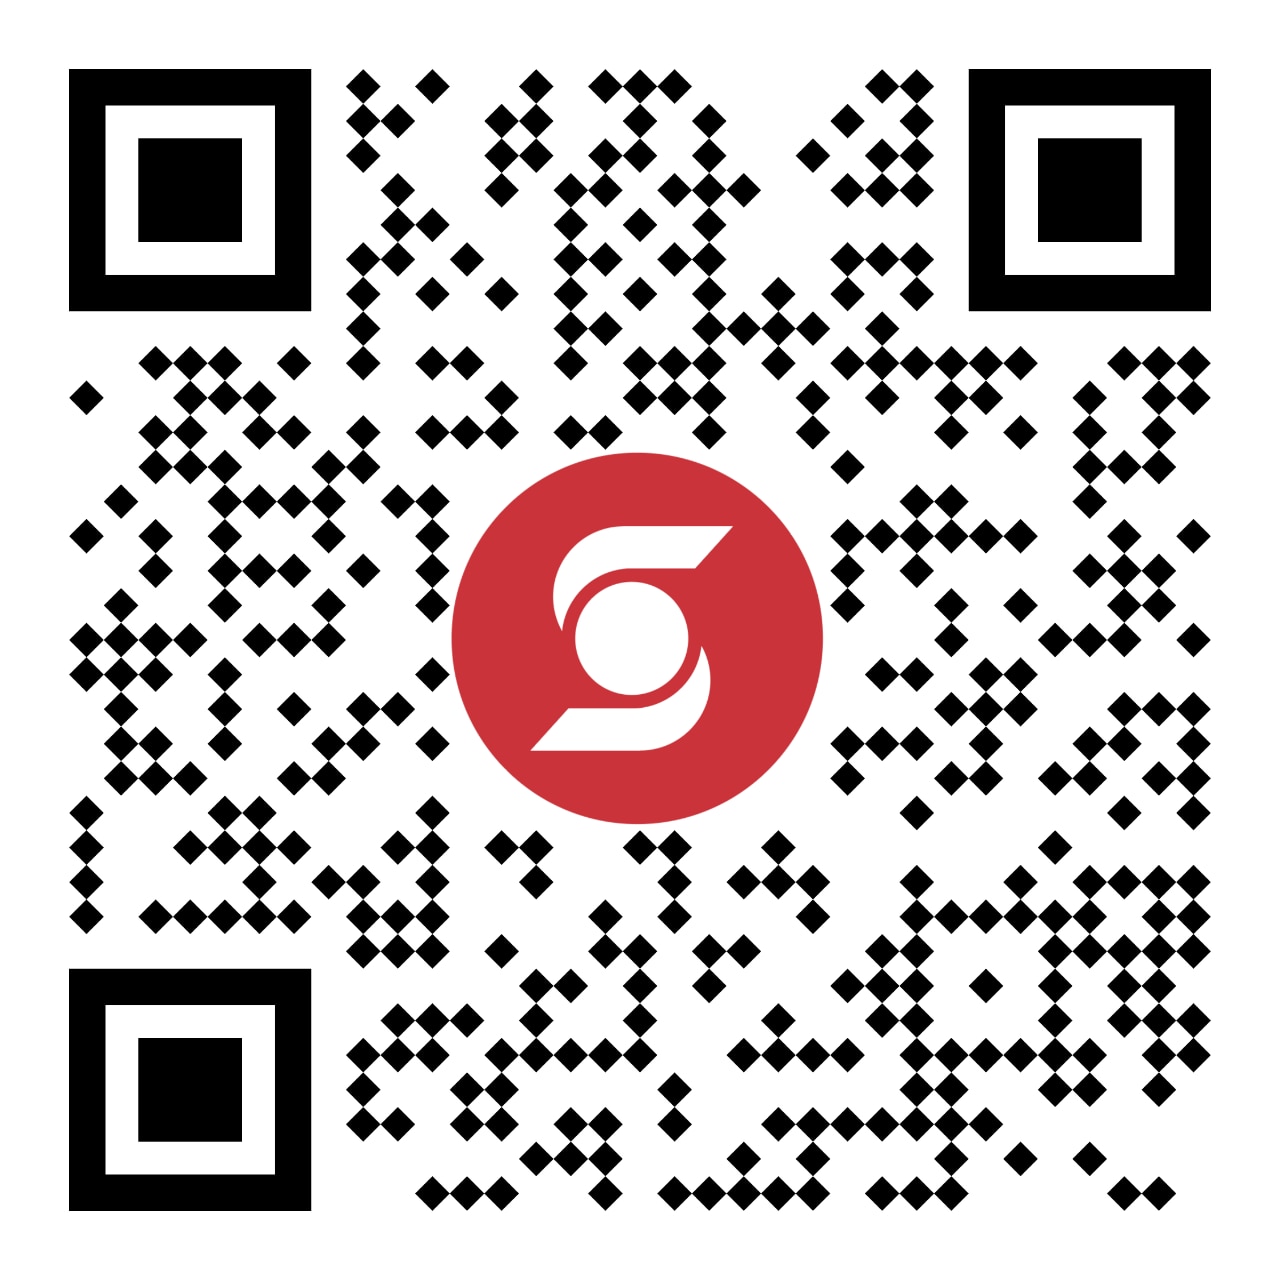 Scan the QR code and download our app today!